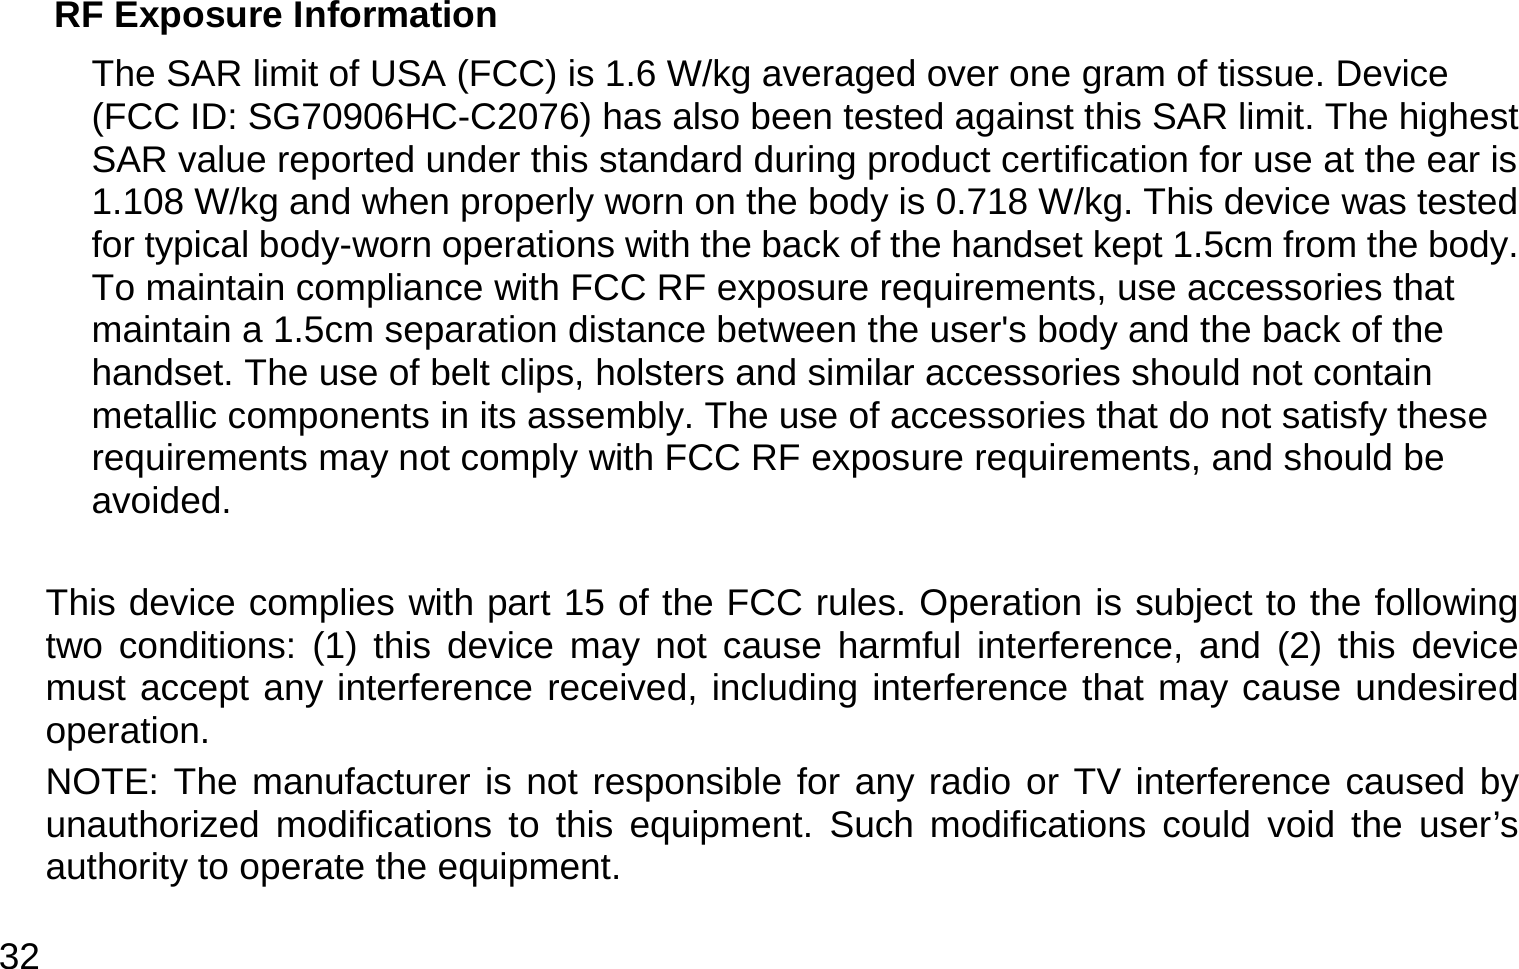  32 RF Exposure Information   The SAR limit of USA (FCC) is 1.6 W/kg averaged over one gram of tissue. Device (FCC ID: SG70906HC-C2076) has also been tested against this SAR limit. The highest SAR value reported under this standard during product certification for use at the ear is 1.108 W/kg and when properly worn on the body is 0.718 W/kg. This device was tested for typical body-worn operations with the back of the handset kept 1.5cm from the body. To maintain compliance with FCC RF exposure requirements, use accessories that maintain a 1.5cm separation distance between the user&apos;s body and the back of the handset. The use of belt clips, holsters and similar accessories should not contain metallic components in its assembly. The use of accessories that do not satisfy these requirements may not comply with FCC RF exposure requirements, and should be avoided.  This device complies with part 15 of the FCC rules. Operation is subject to the following two conditions: (1) this device may not cause harmful interference, and (2) this device must accept any interference received, including interference that may cause undesired operation. NOTE: The manufacturer is not responsible for any radio or TV interference caused by unauthorized modifications to this equipment. Such modifications could void the user’s authority to operate the equipment. 